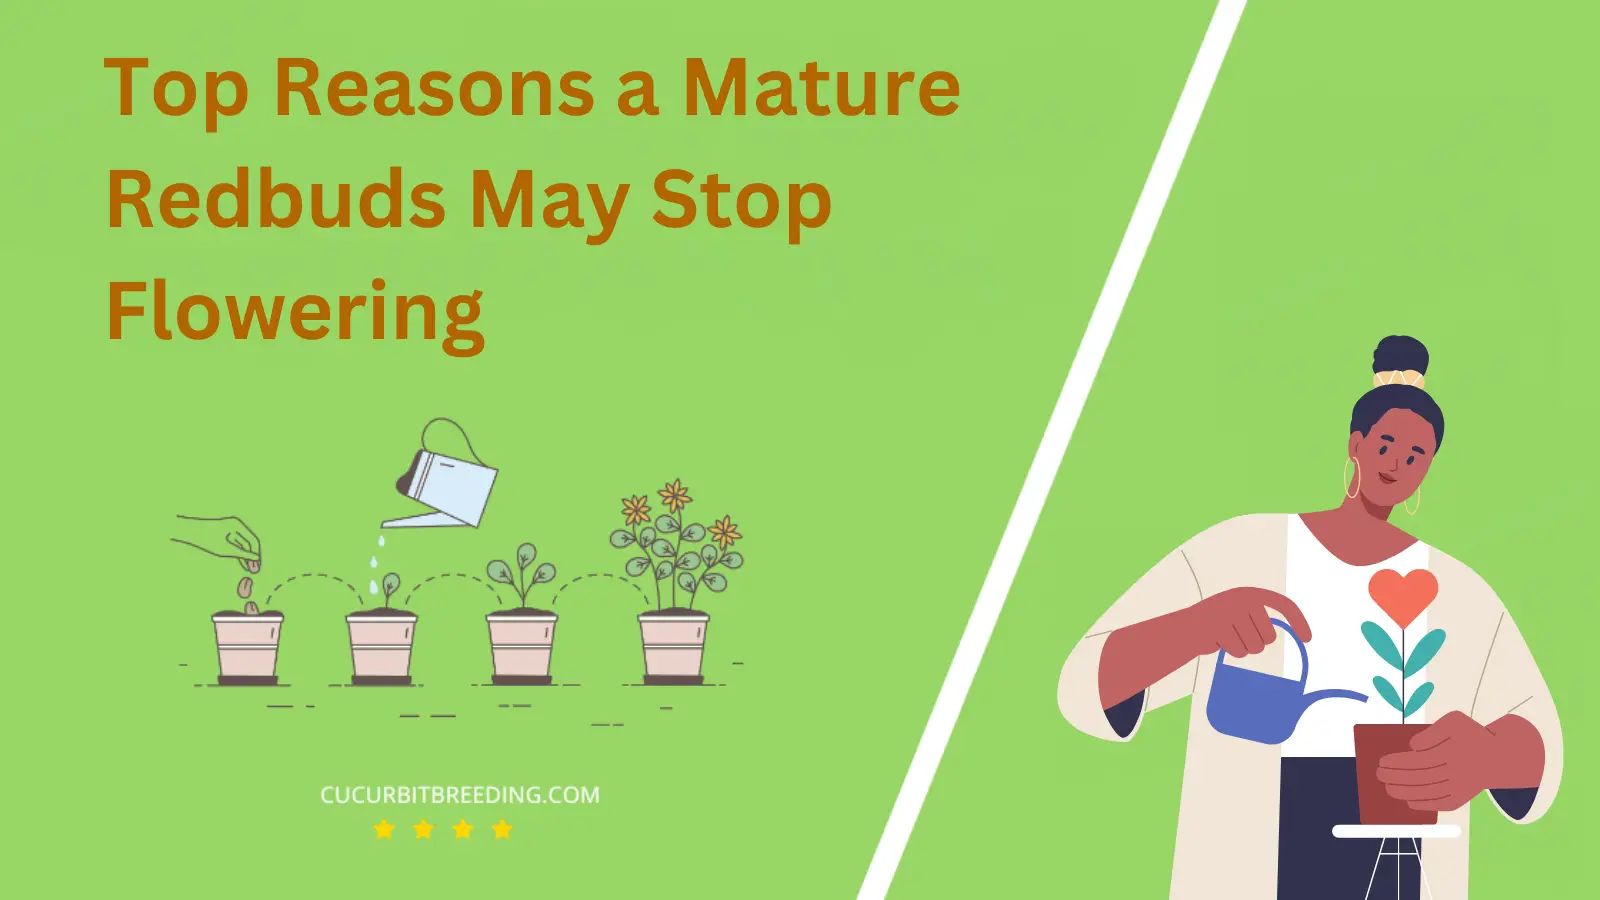 Top Reasons a Mature Redbuds May Stop Flowering